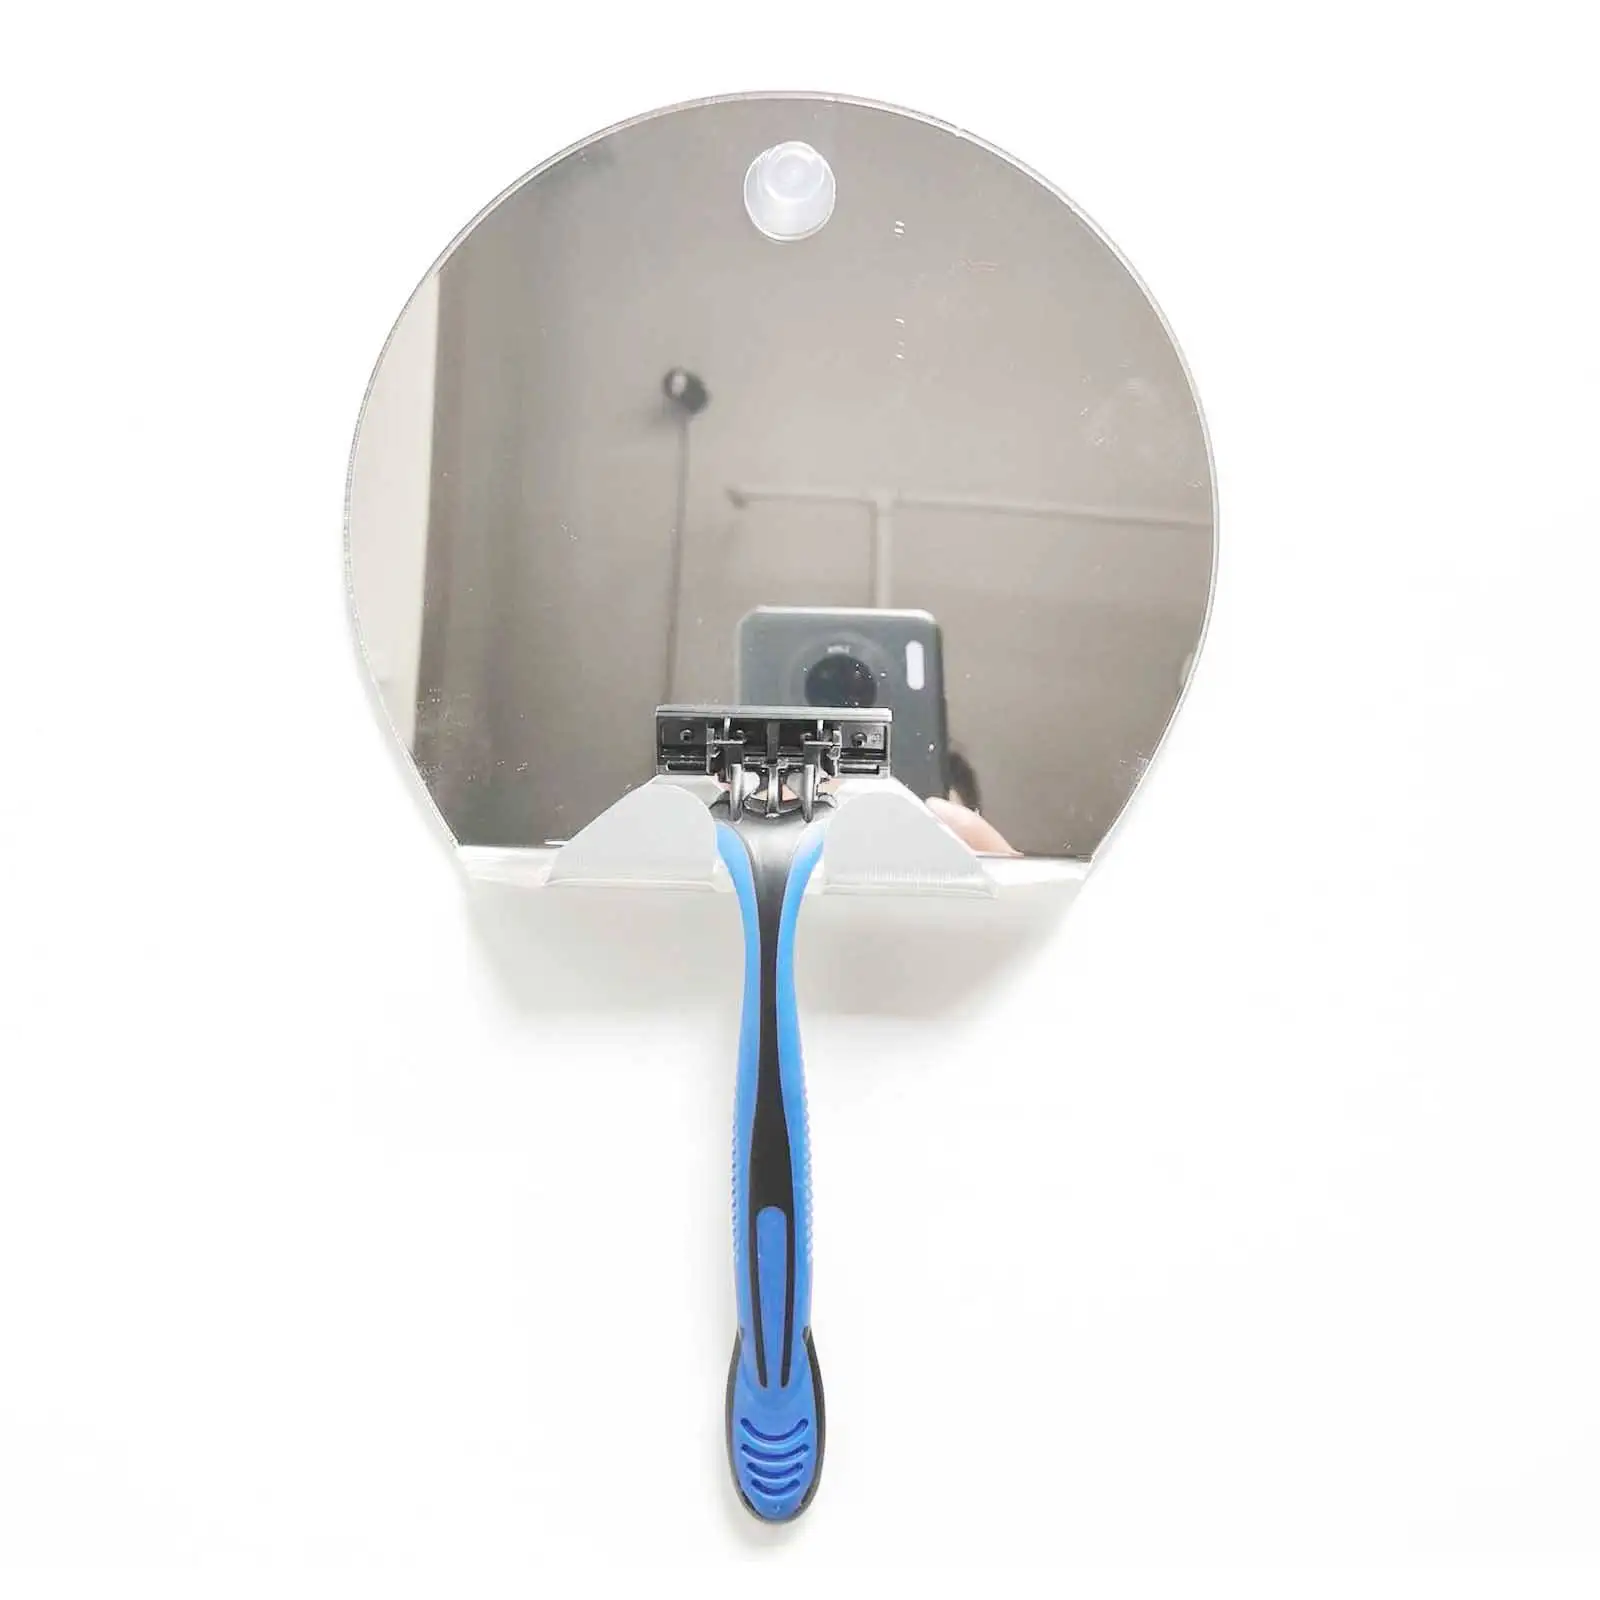 Portable Acrylic Anti Fog Mirror with Suction Cup Round No Fog Makeup Mirror